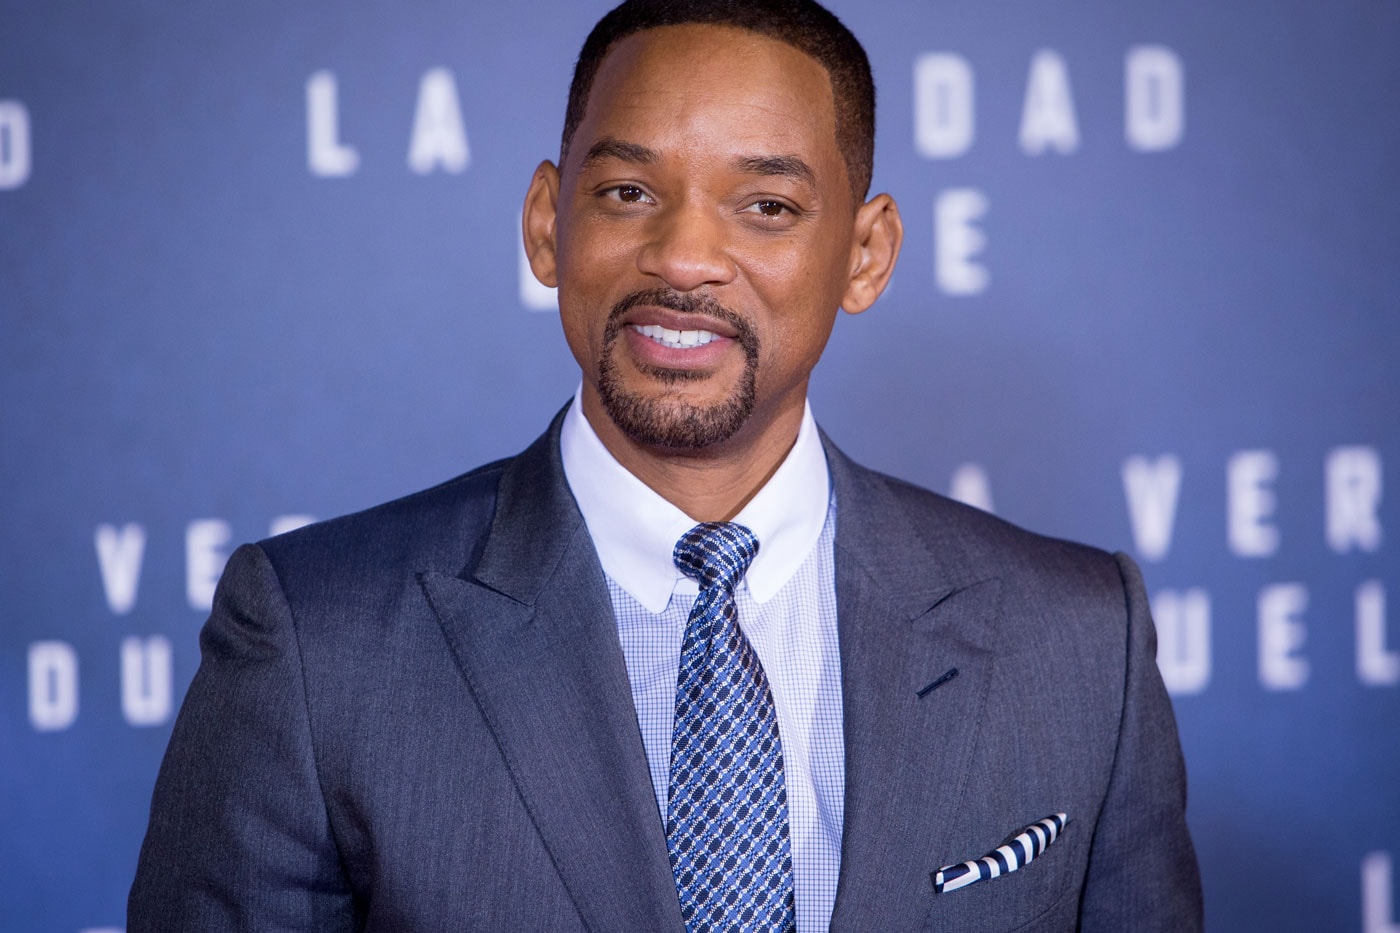 Will Smith Speaks on Racism in America: "Racism Isn’t Getting Worse, It’s Getting Filmed"